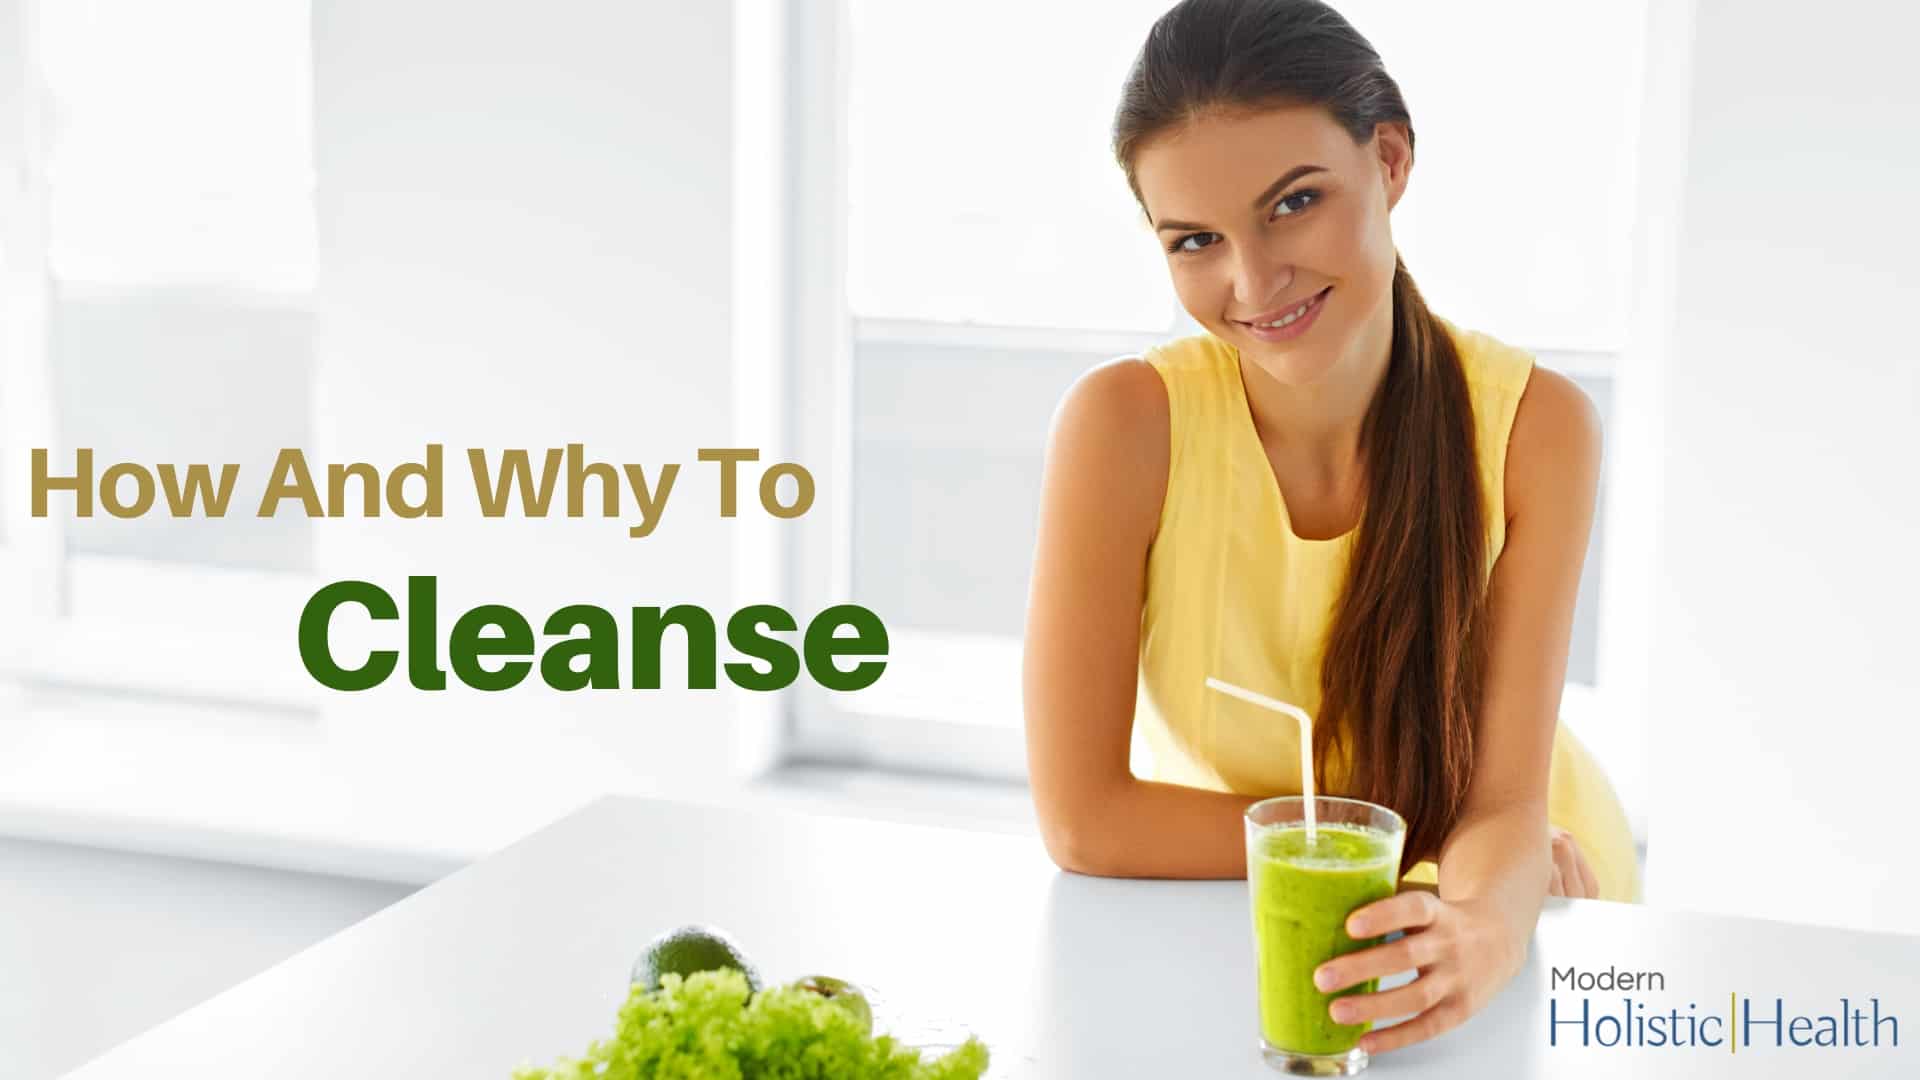 How And Why To Cleanse